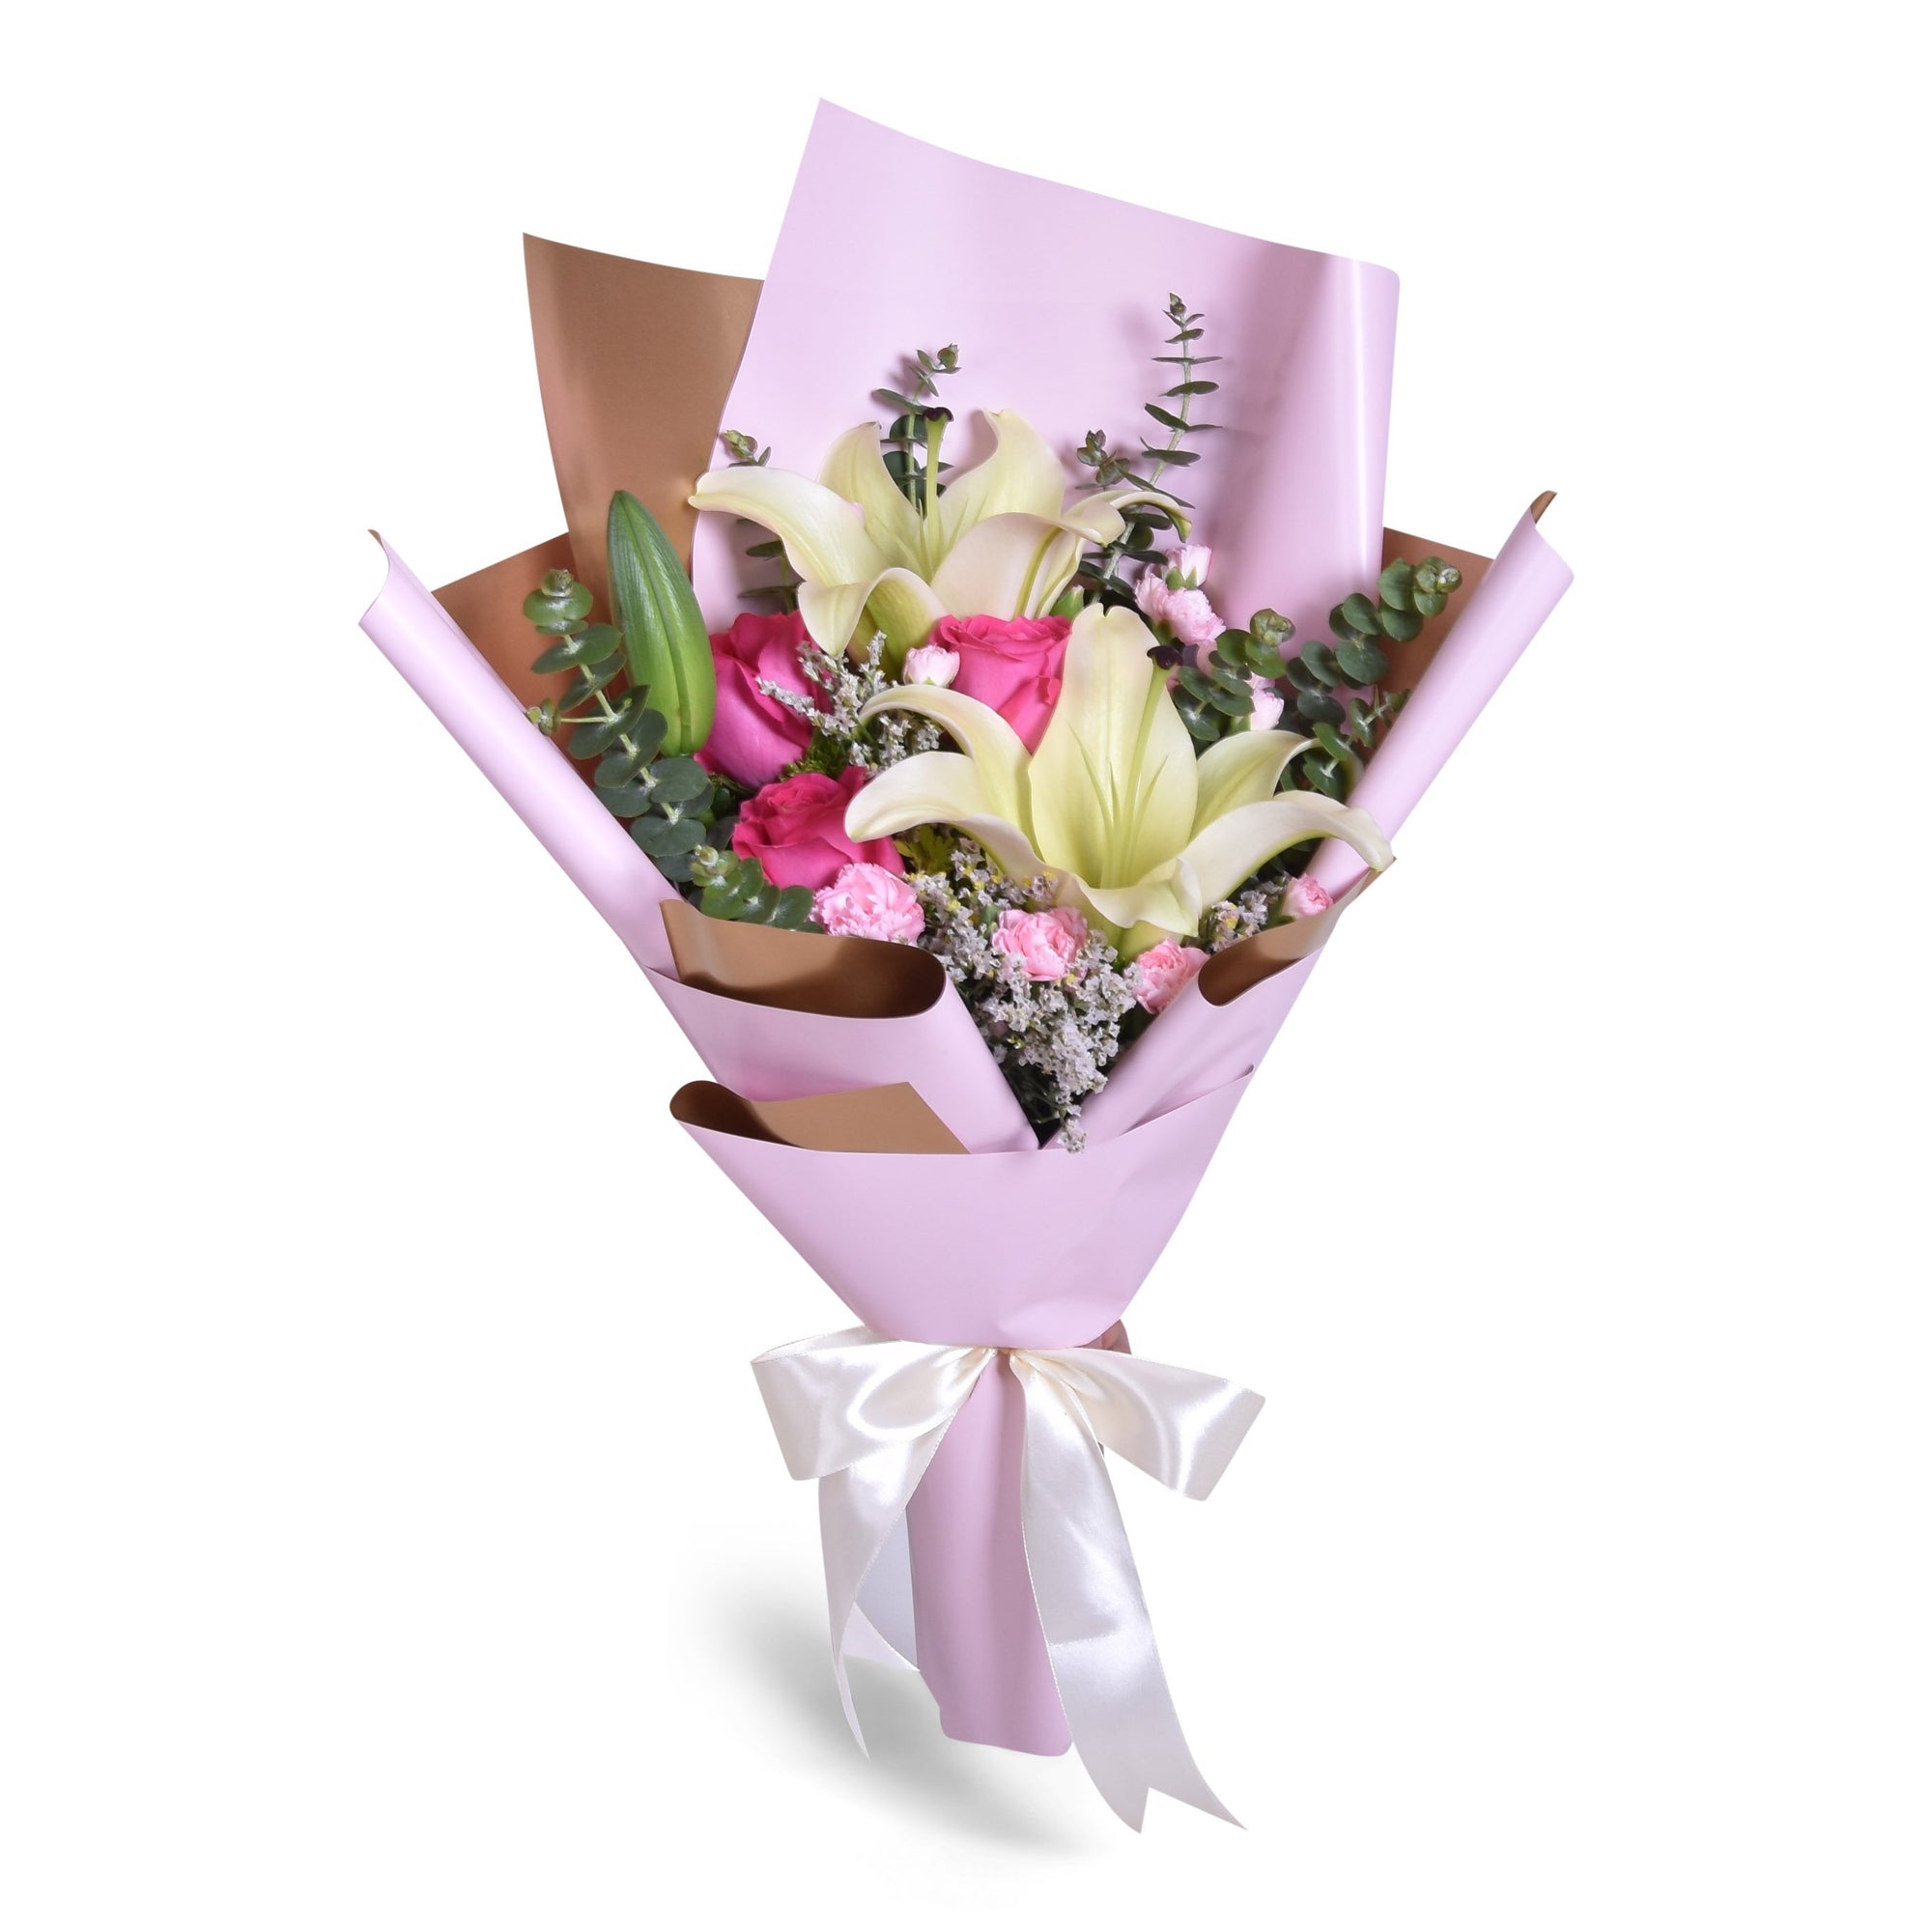 Any type of Flower Delivery | Best Online Florist in Indonesia | Flower Chimp